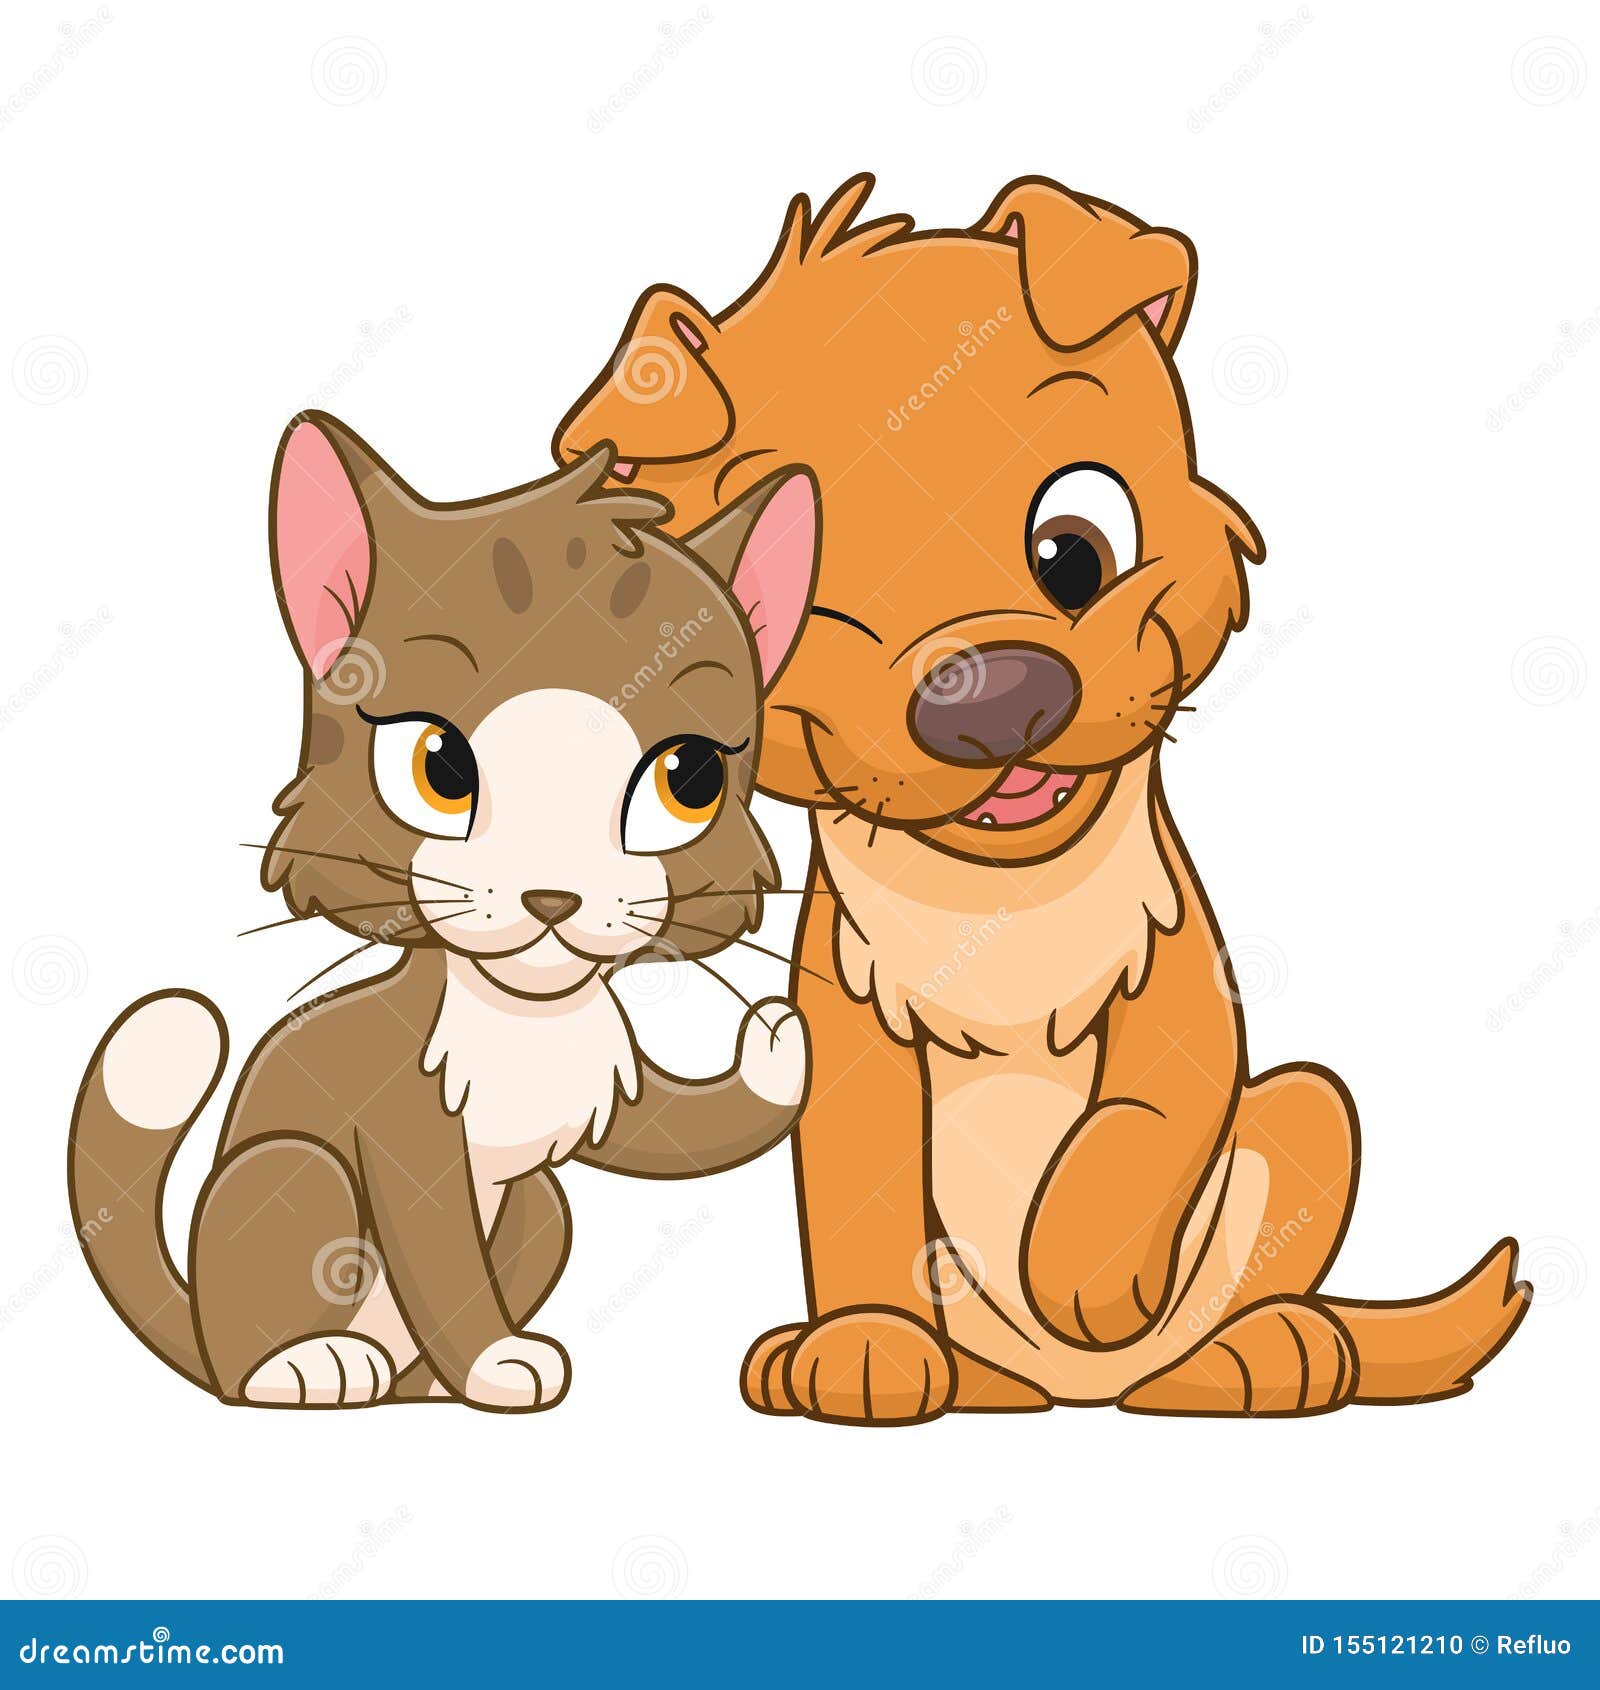 Cartoon cute cat and dog stock vector. Illustration of cheerful - 155121210